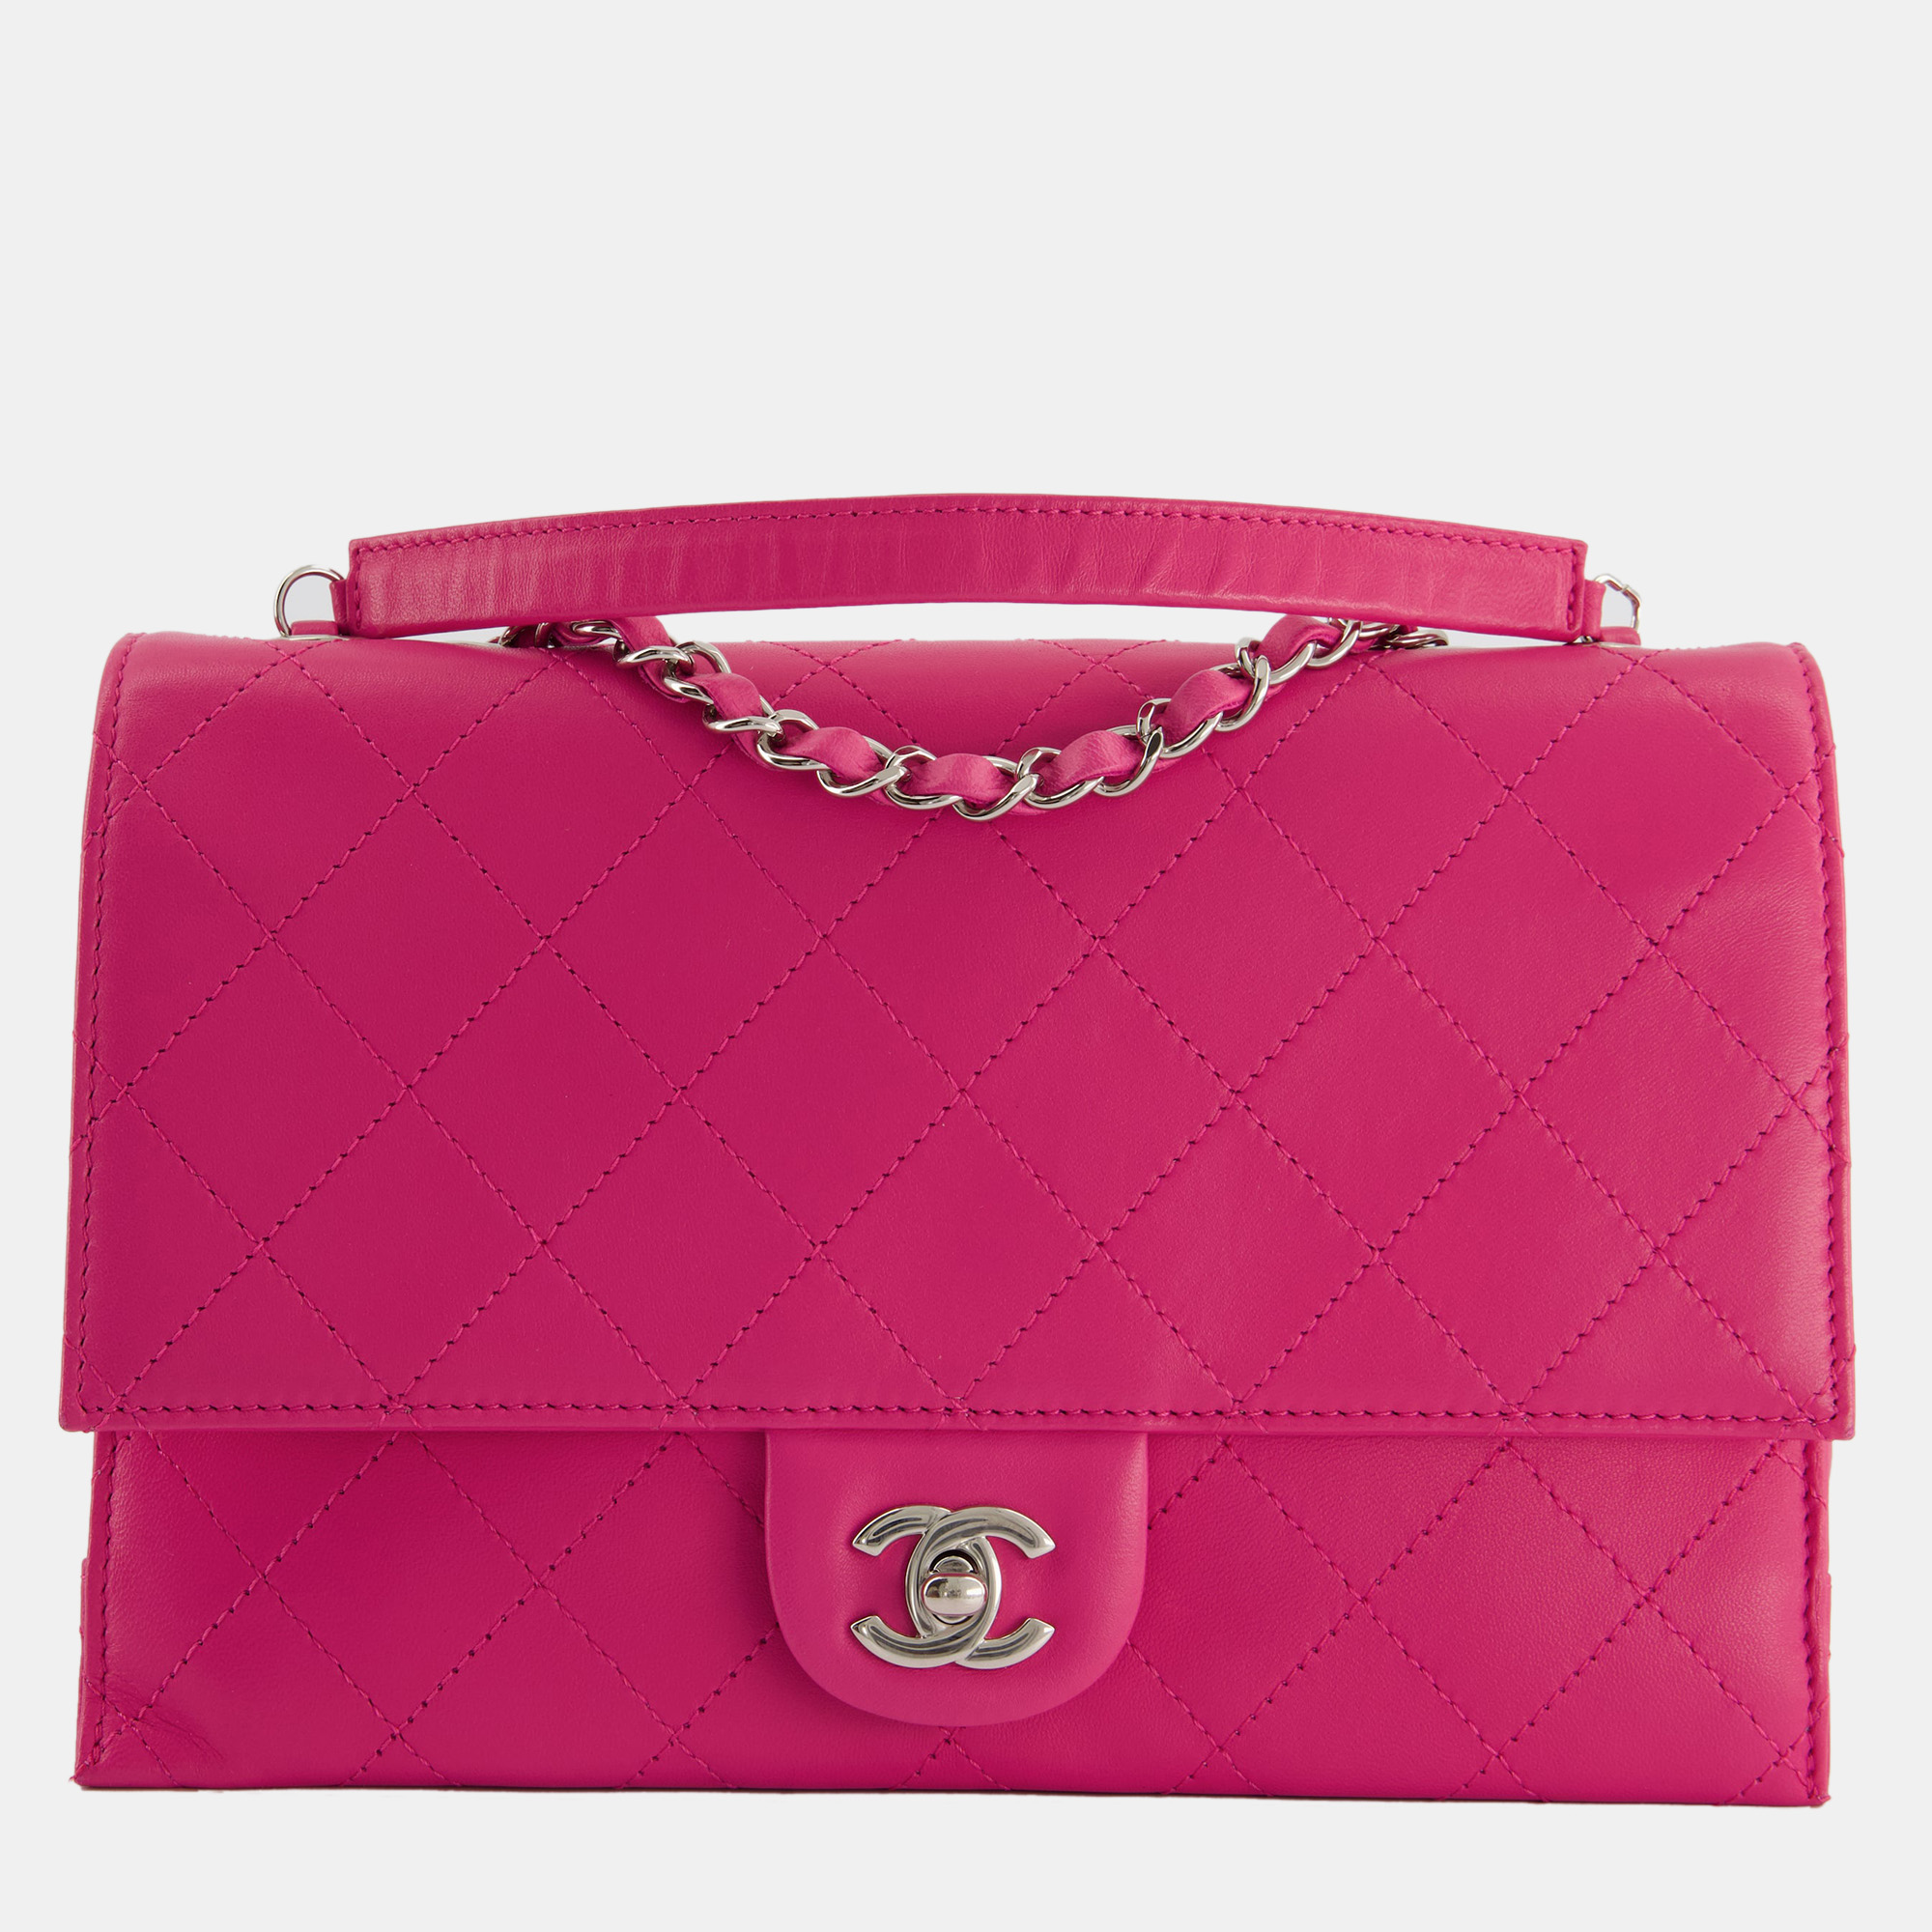 Chanel hot pink small accordion quilted single flap bag in calfskin leather with silver hardware